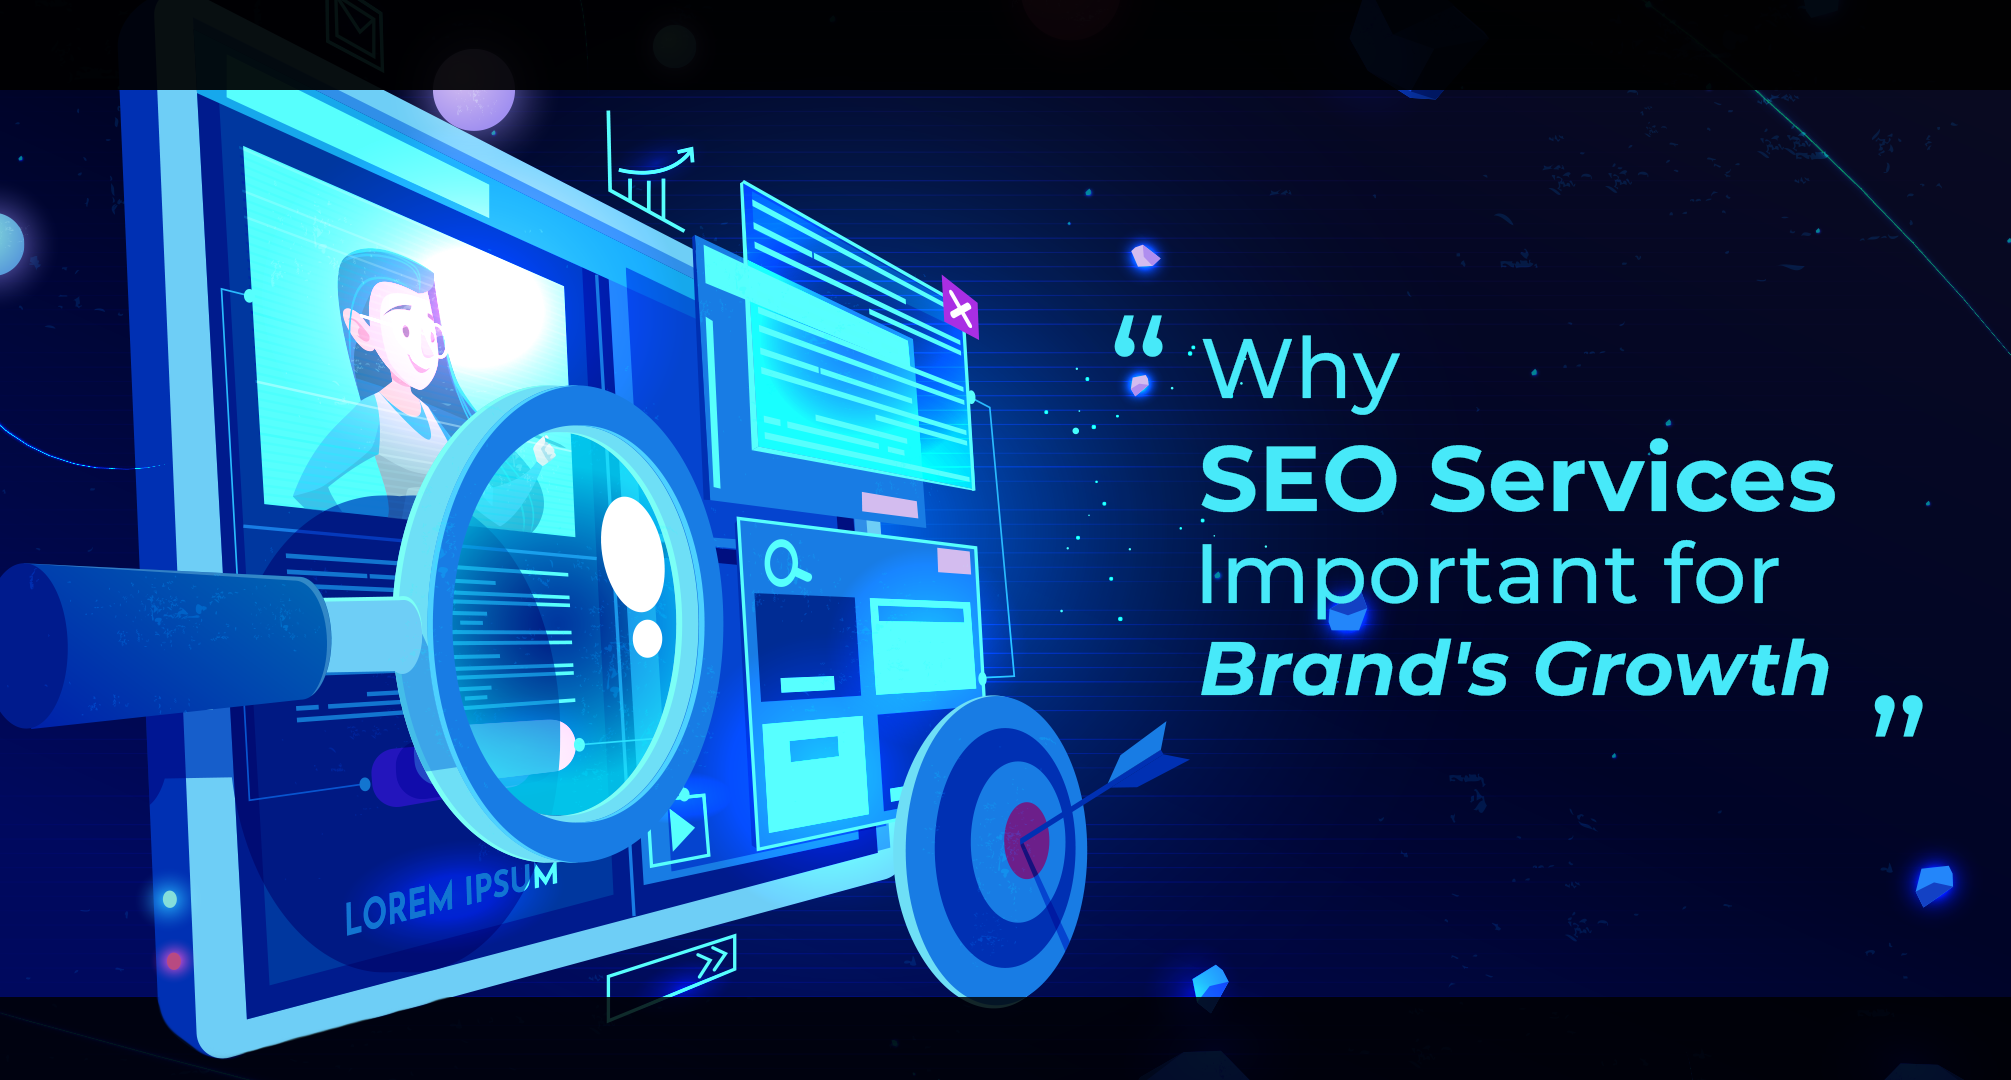 Why SEO Services Important for Brand's Growth?